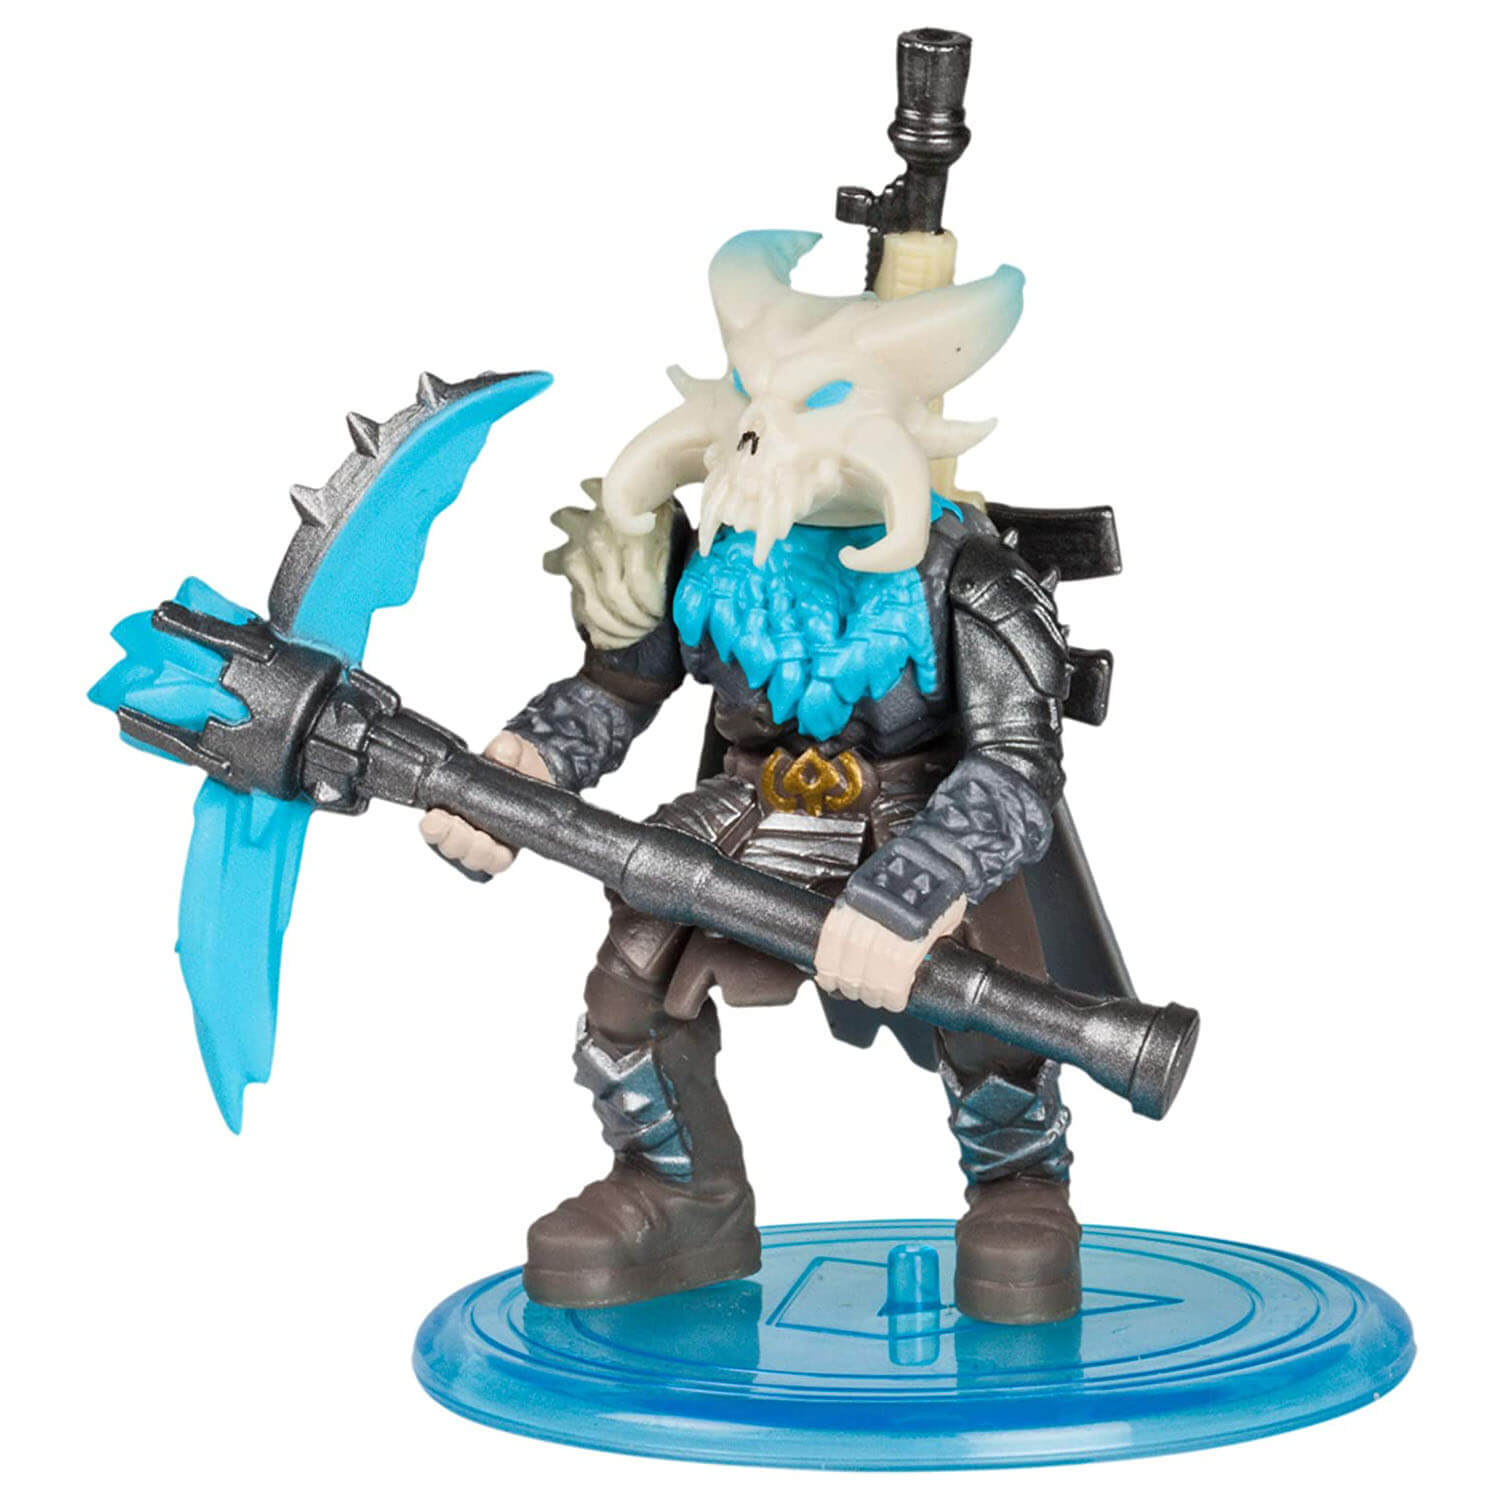 Front view of a fortnite figure